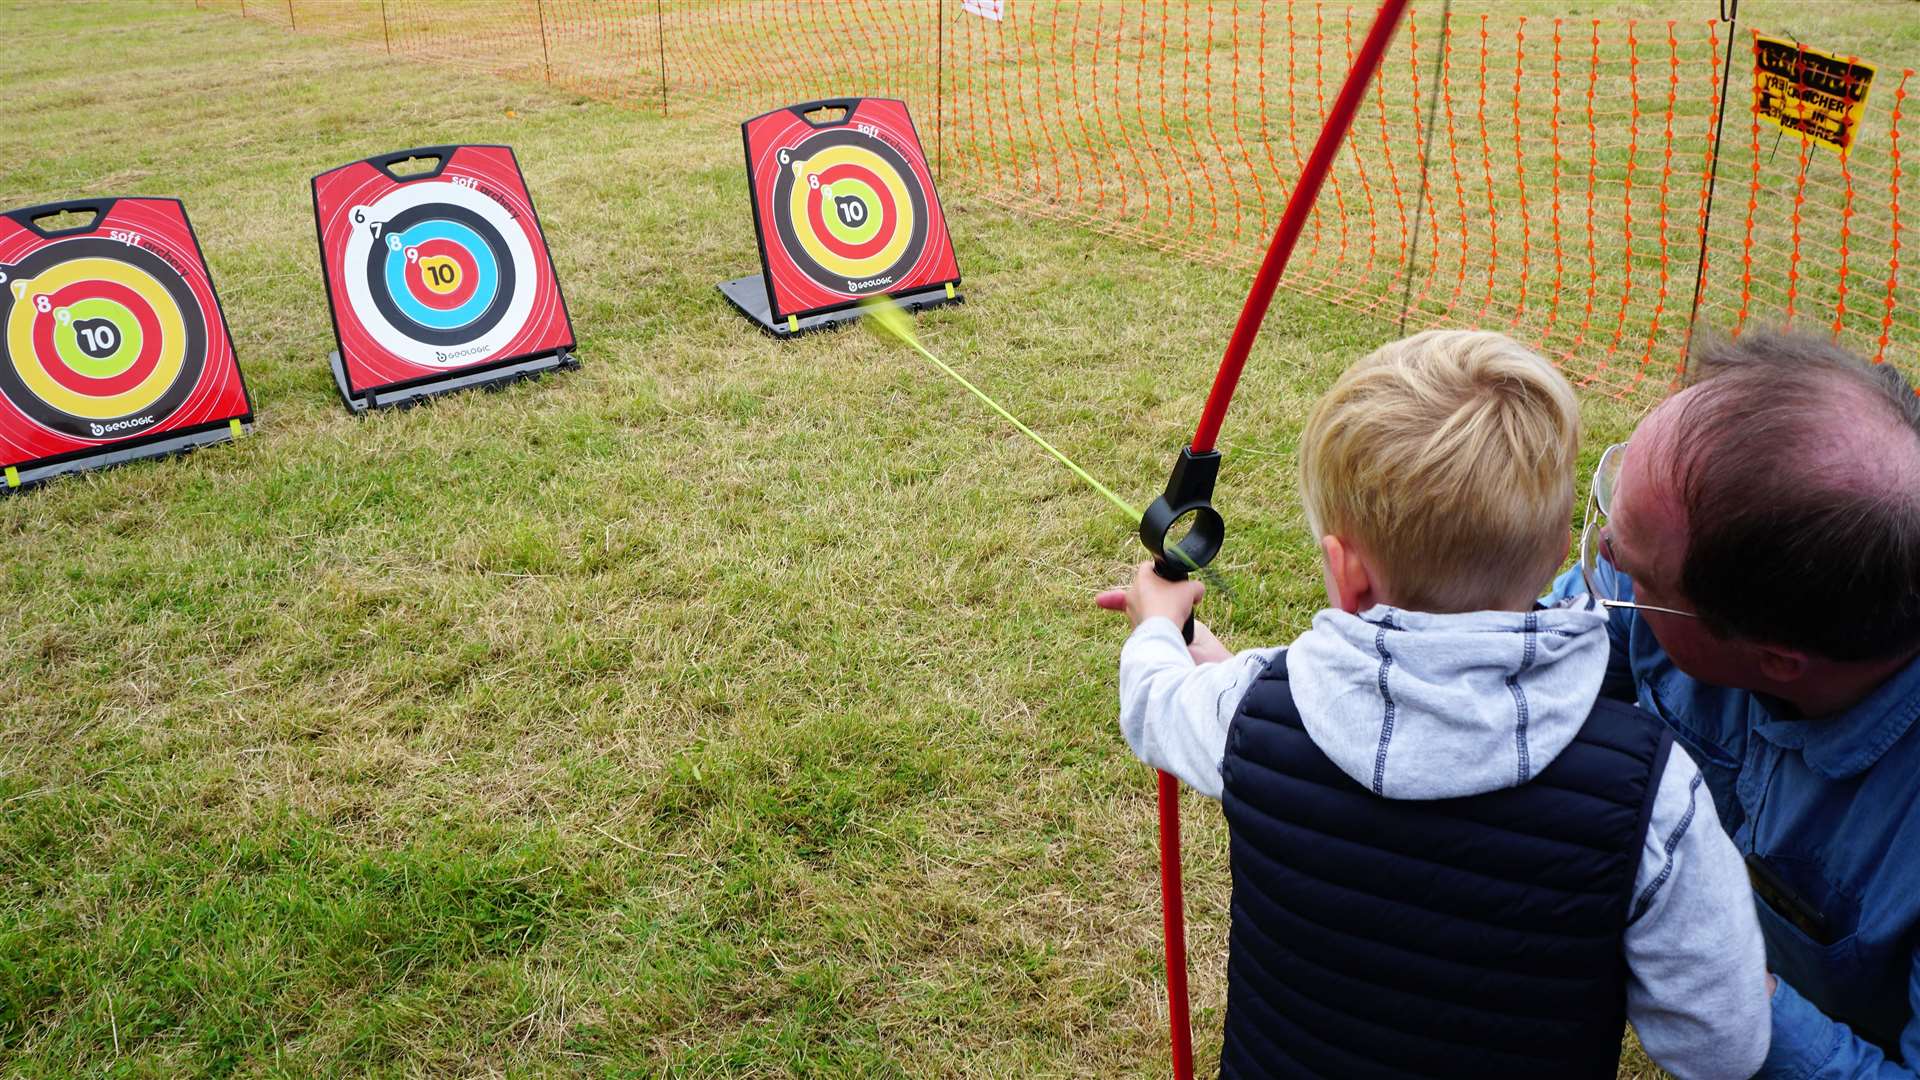 There was a special archery event for children. Picture: DGS